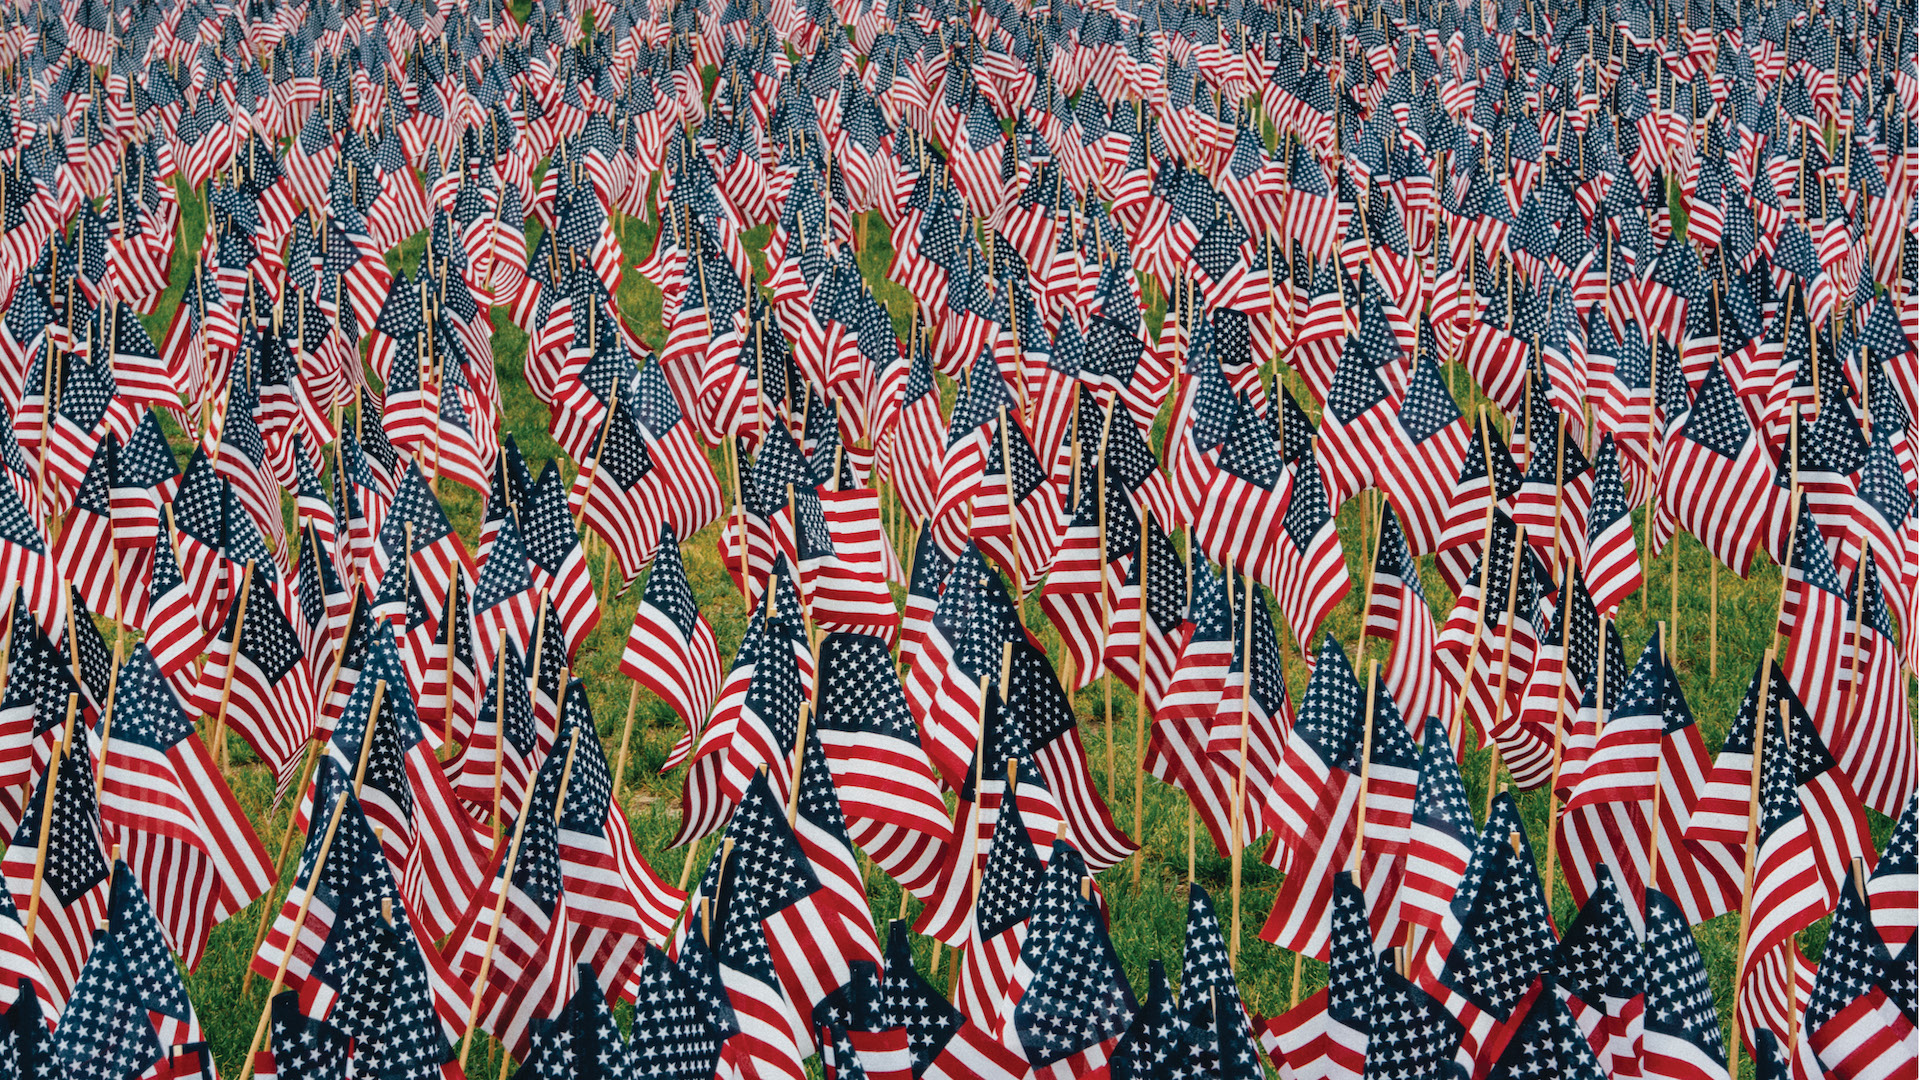 Photo of several american flags staked into green grass